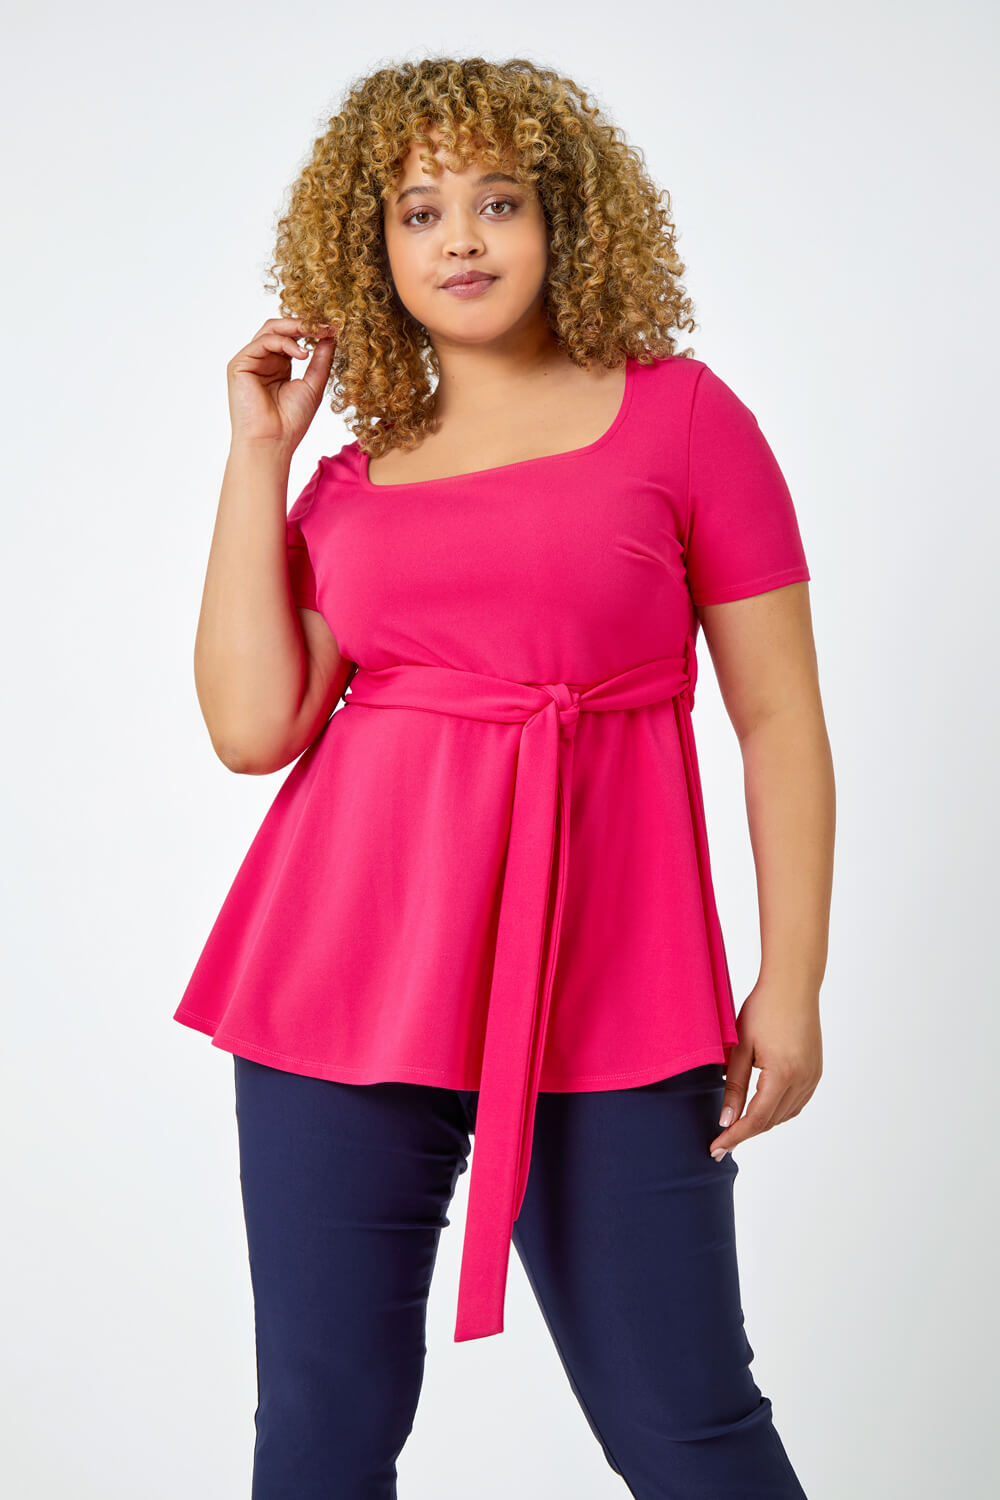 PINK Curve Stretch Belted Peplum Top, Image 4 of 5